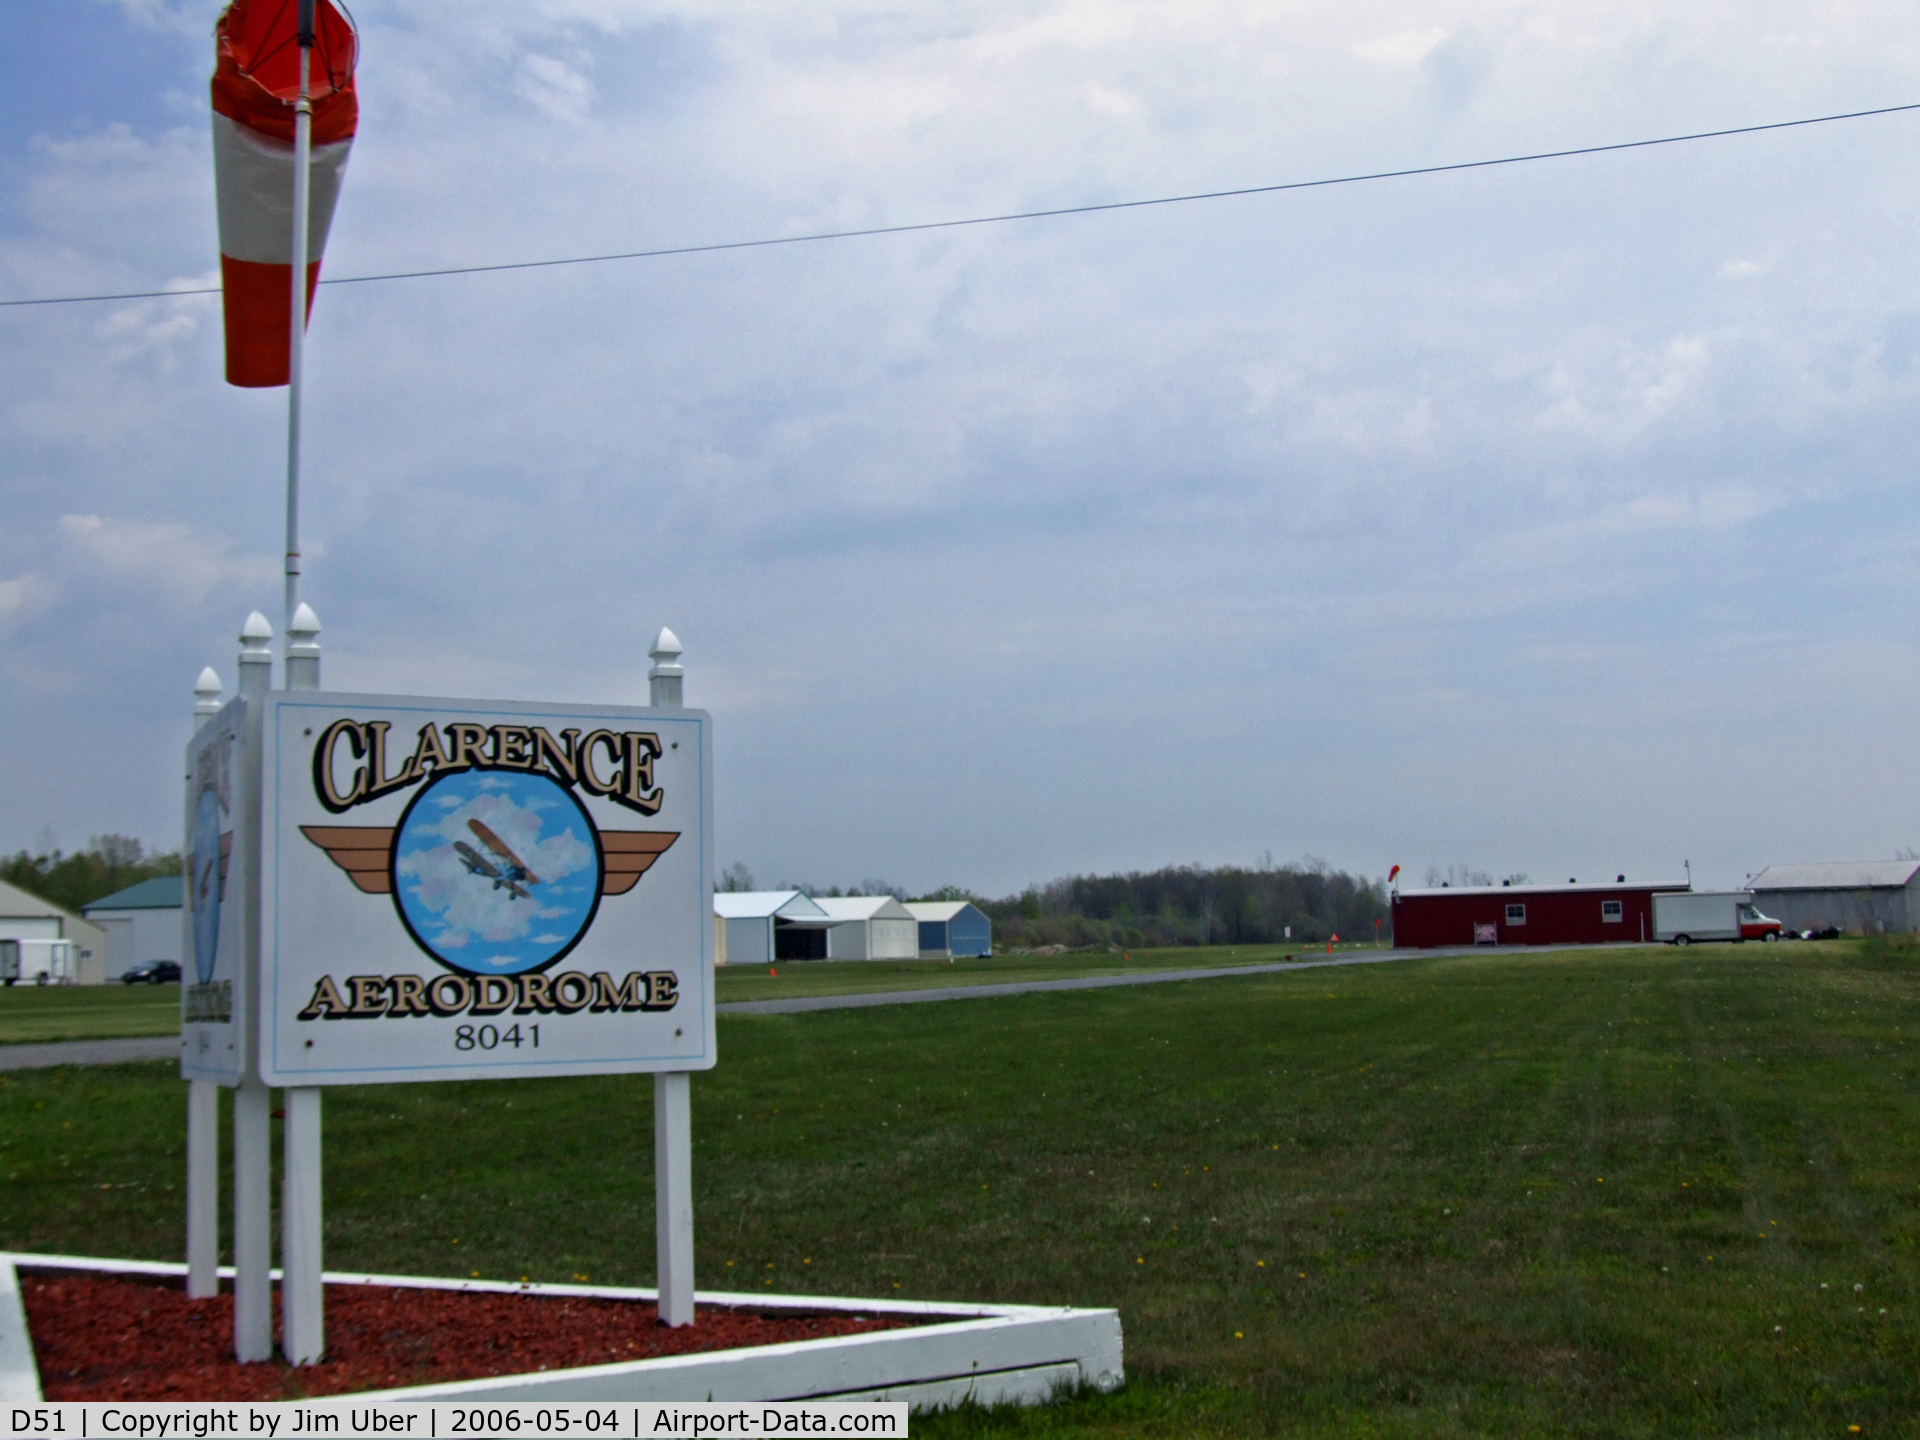 Clarence Aerodrome Airport (D51) - Clarence- a very friendly, old-style grass field